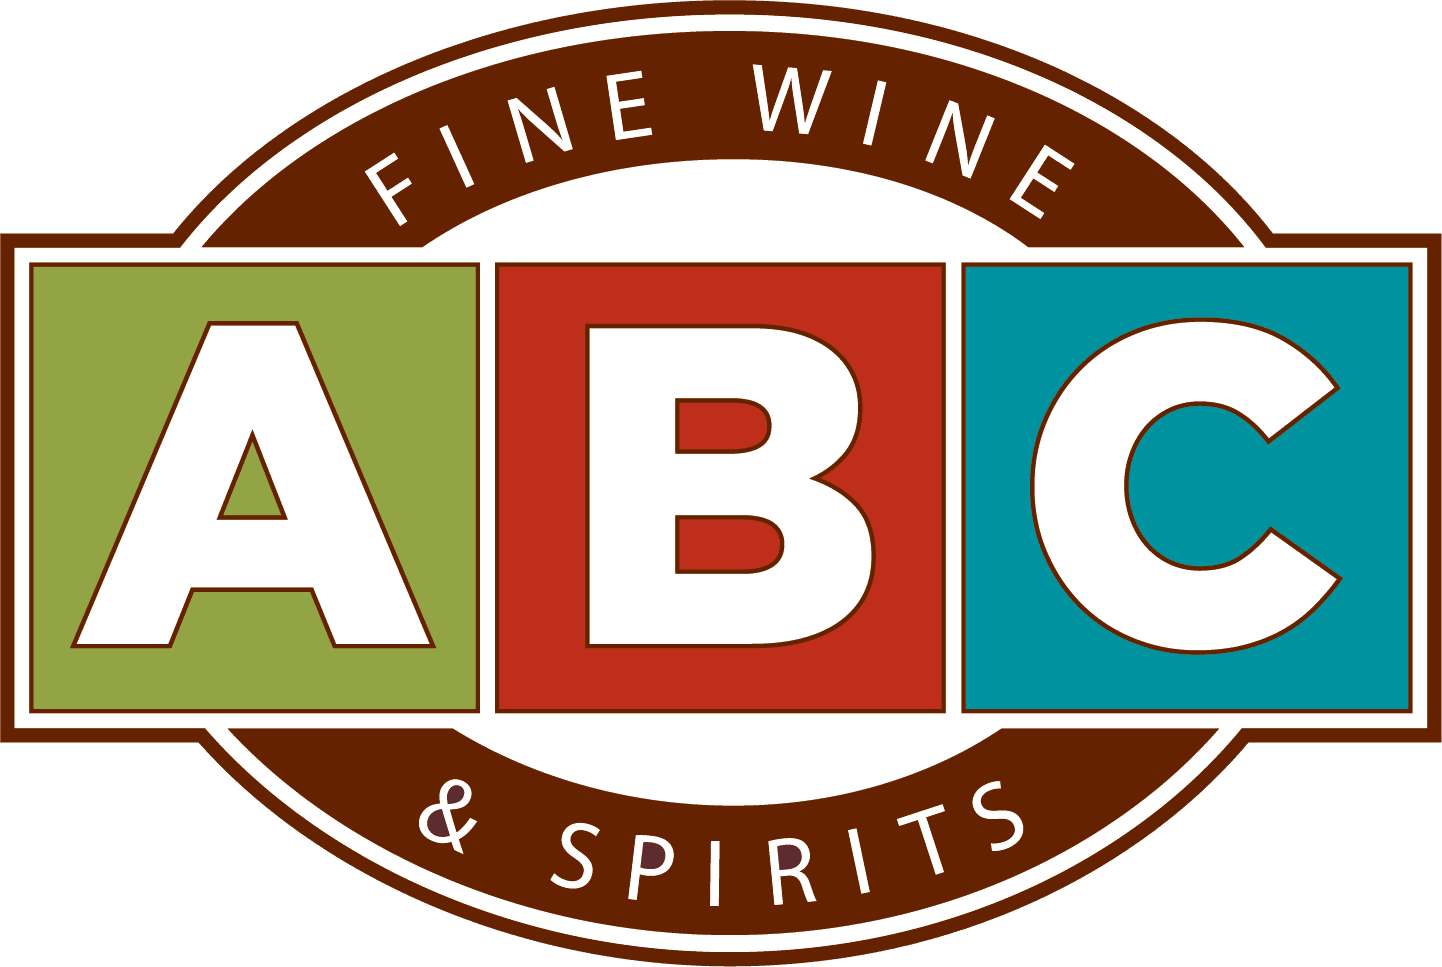 ABC Fine Wine and Spirits Flat Full Color Logo